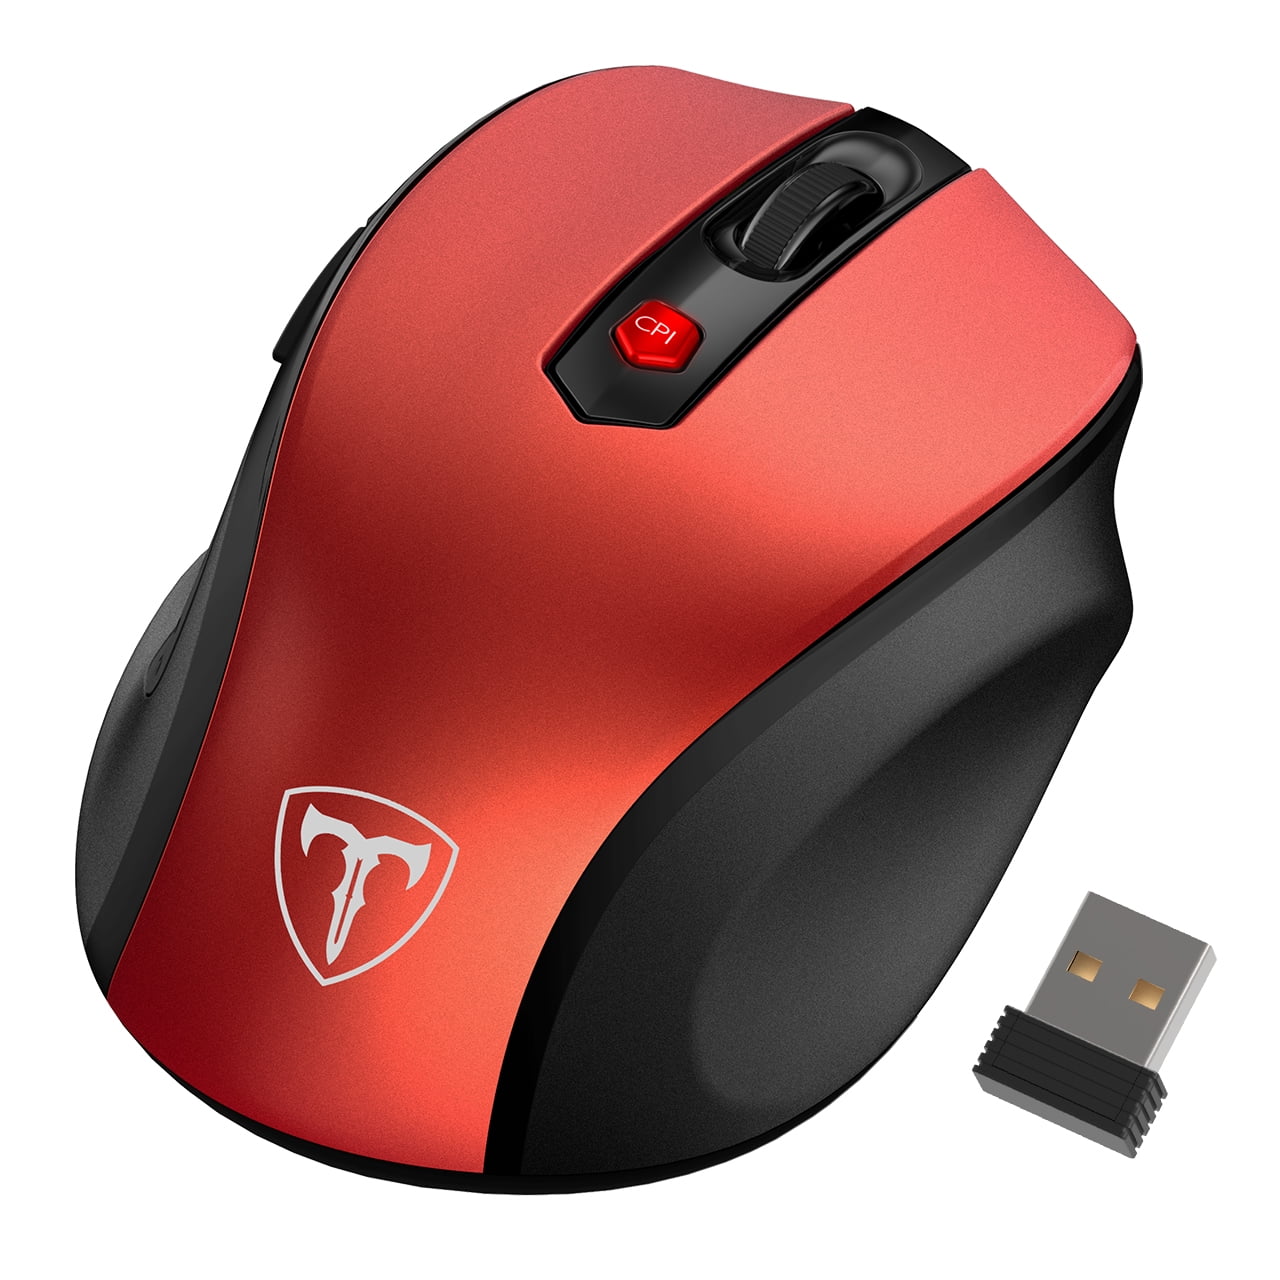 VicTsing Wireless Mouse, USB Cordless Computer Mouse W/800-2400 DPI, Ergo Grips, Months Battery, Auto-sleep Mode, Portable Gaming Mouse for PC Mac Chromebook Red - Walmart.com